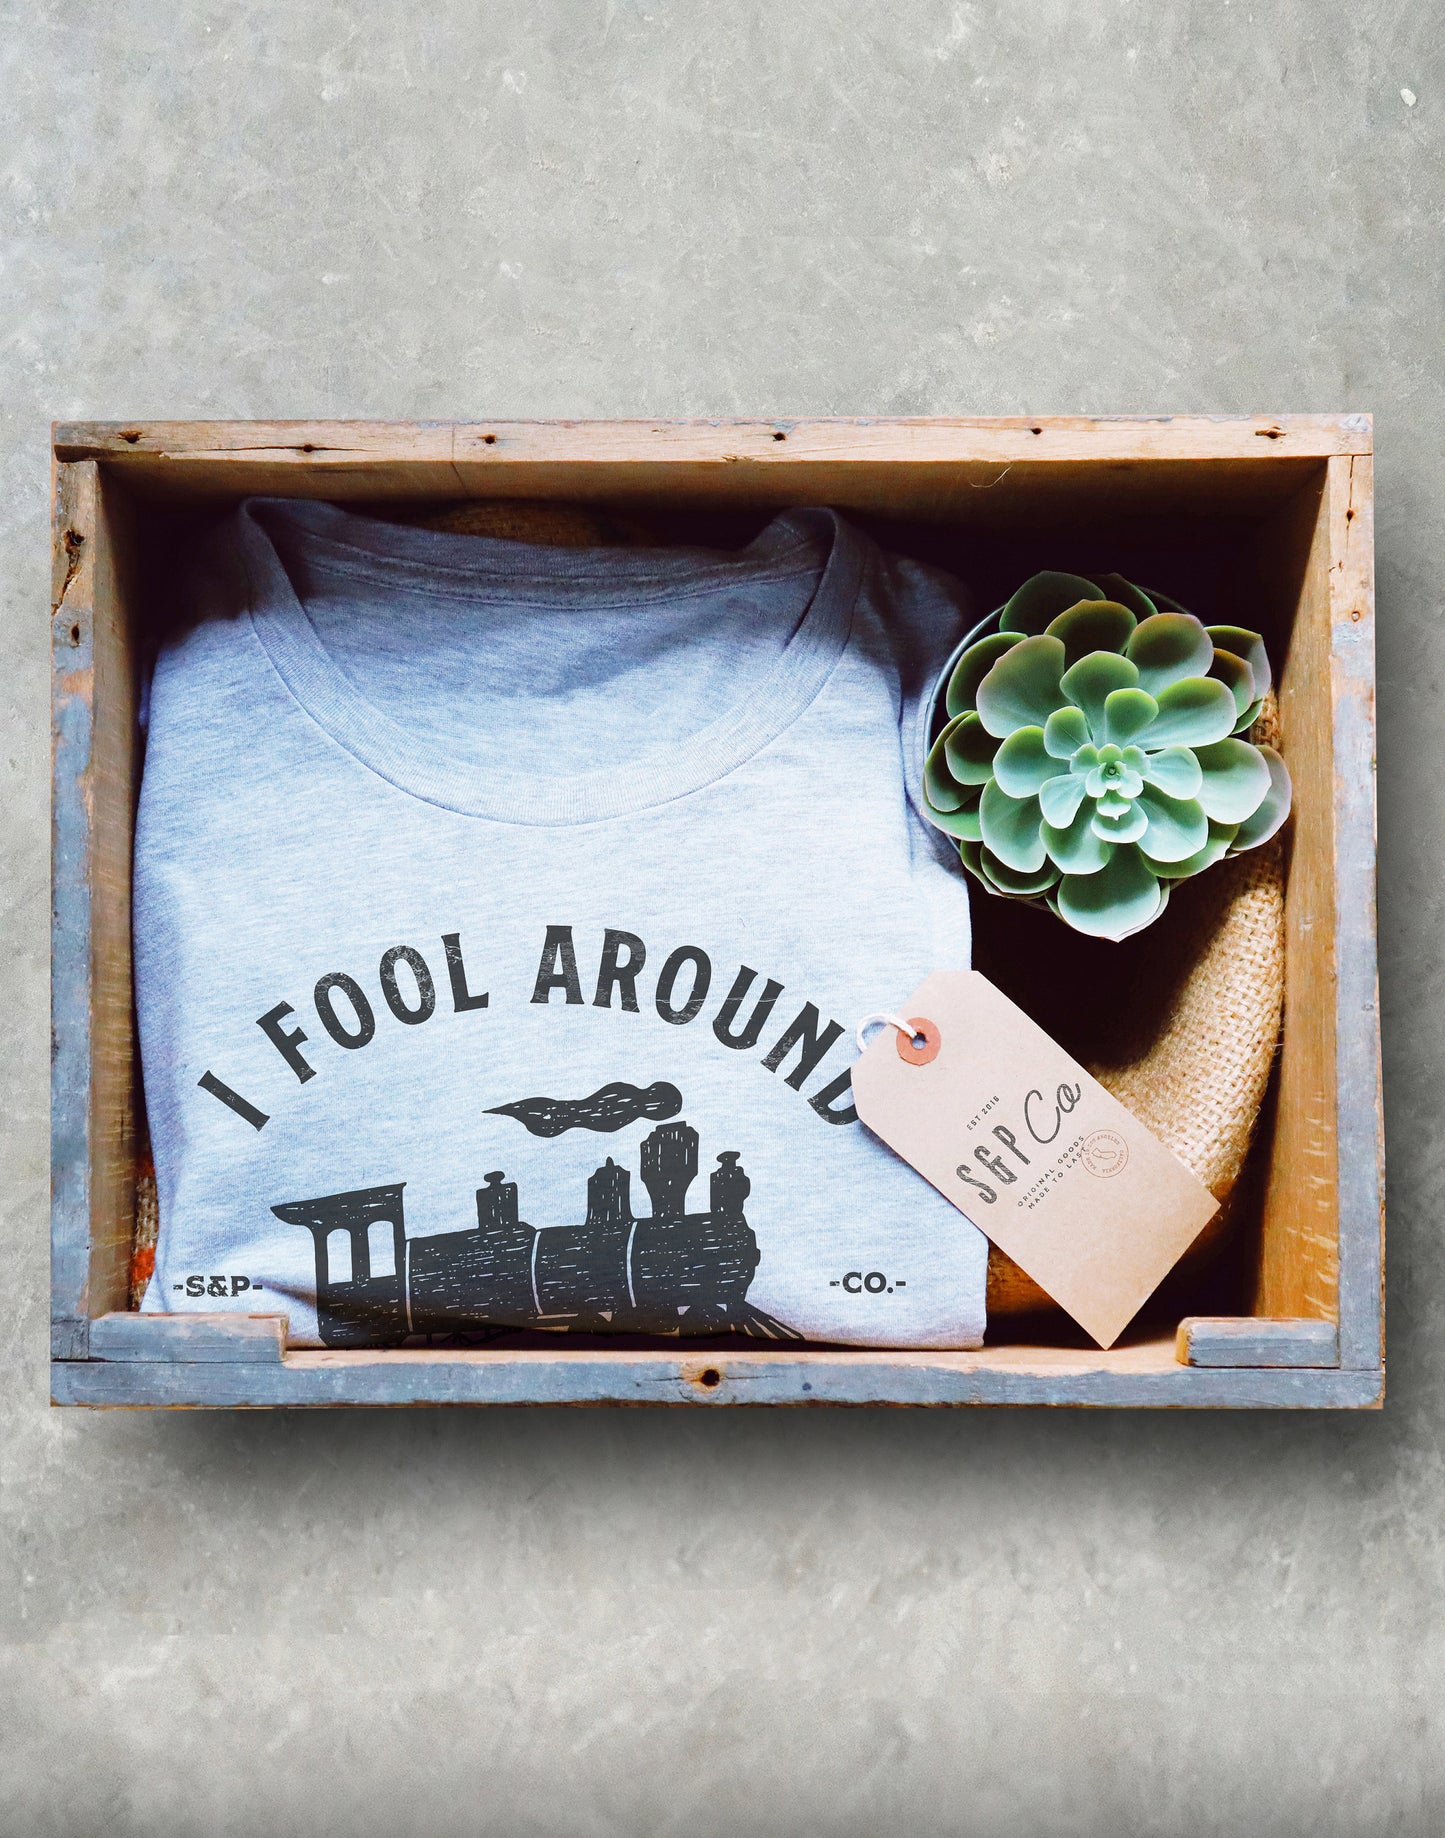 I Fool Around With Models Unisex Shirt - Model Train Shirt, Railroad T-Shirt, Toy Train Set Tee, Train Collector Gift, Trainspotter Gifts